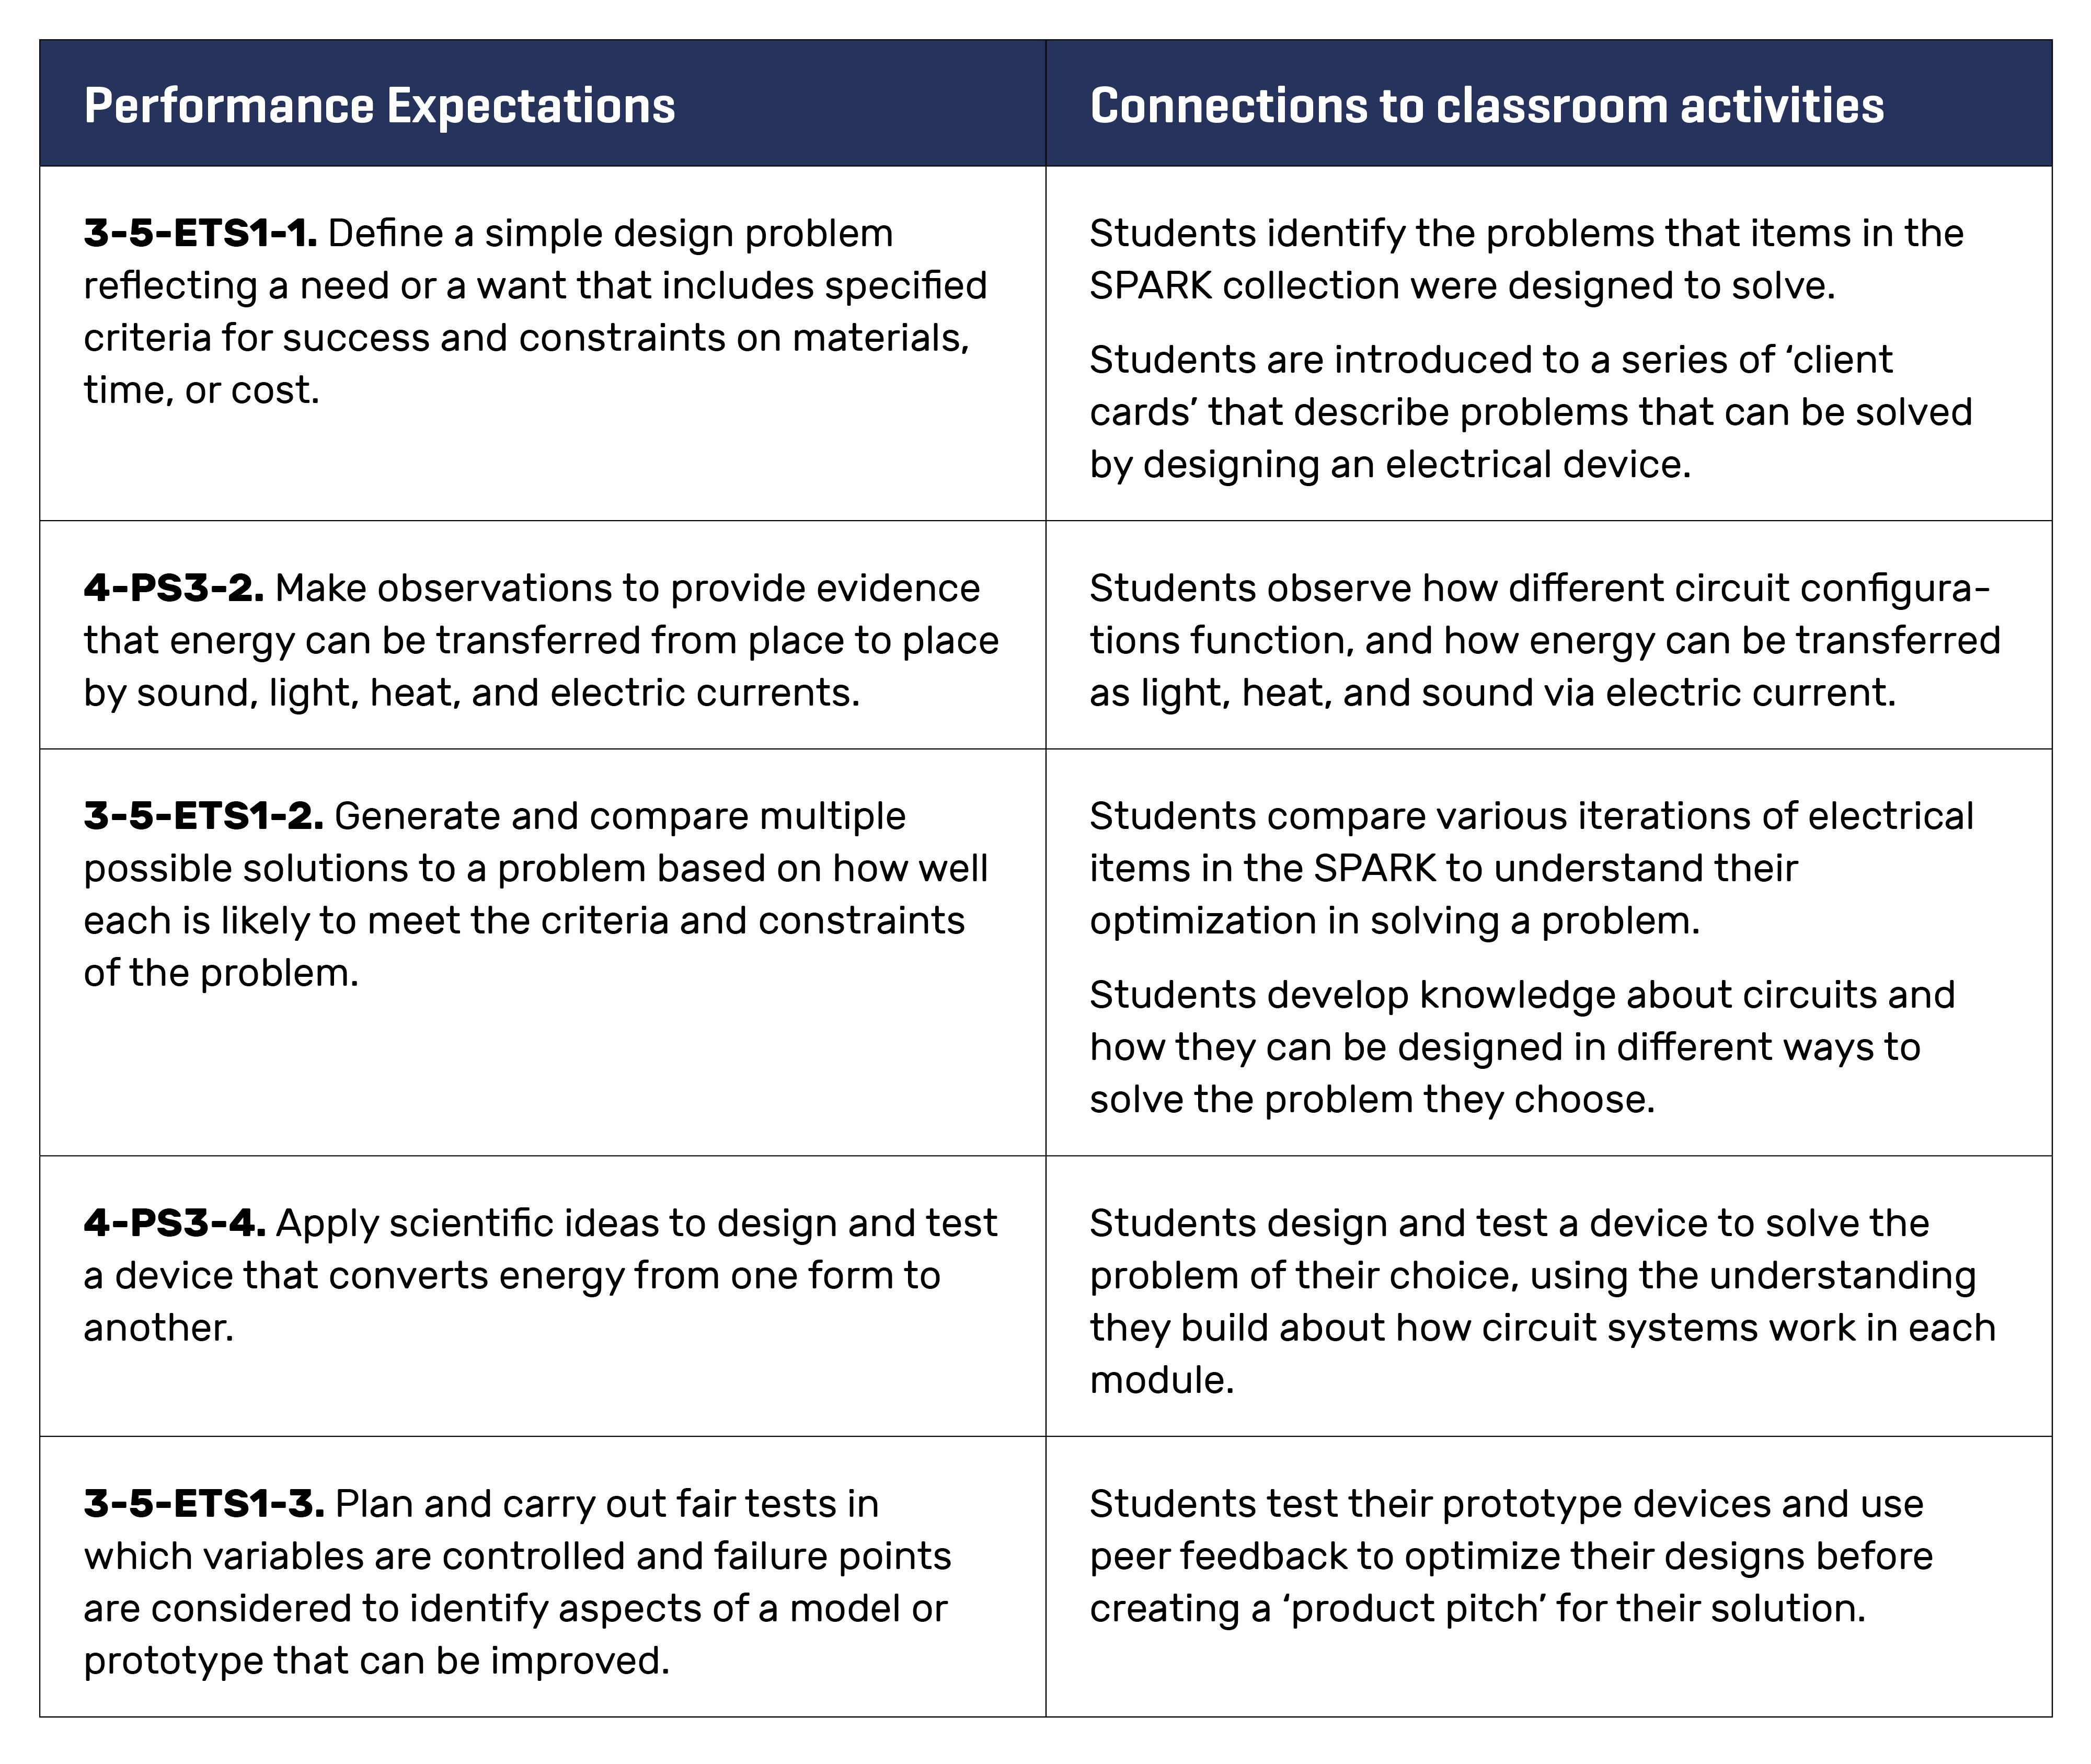 Figure 3 Bundle of NGSS Performance Expectations on which the curriculum modules are built.